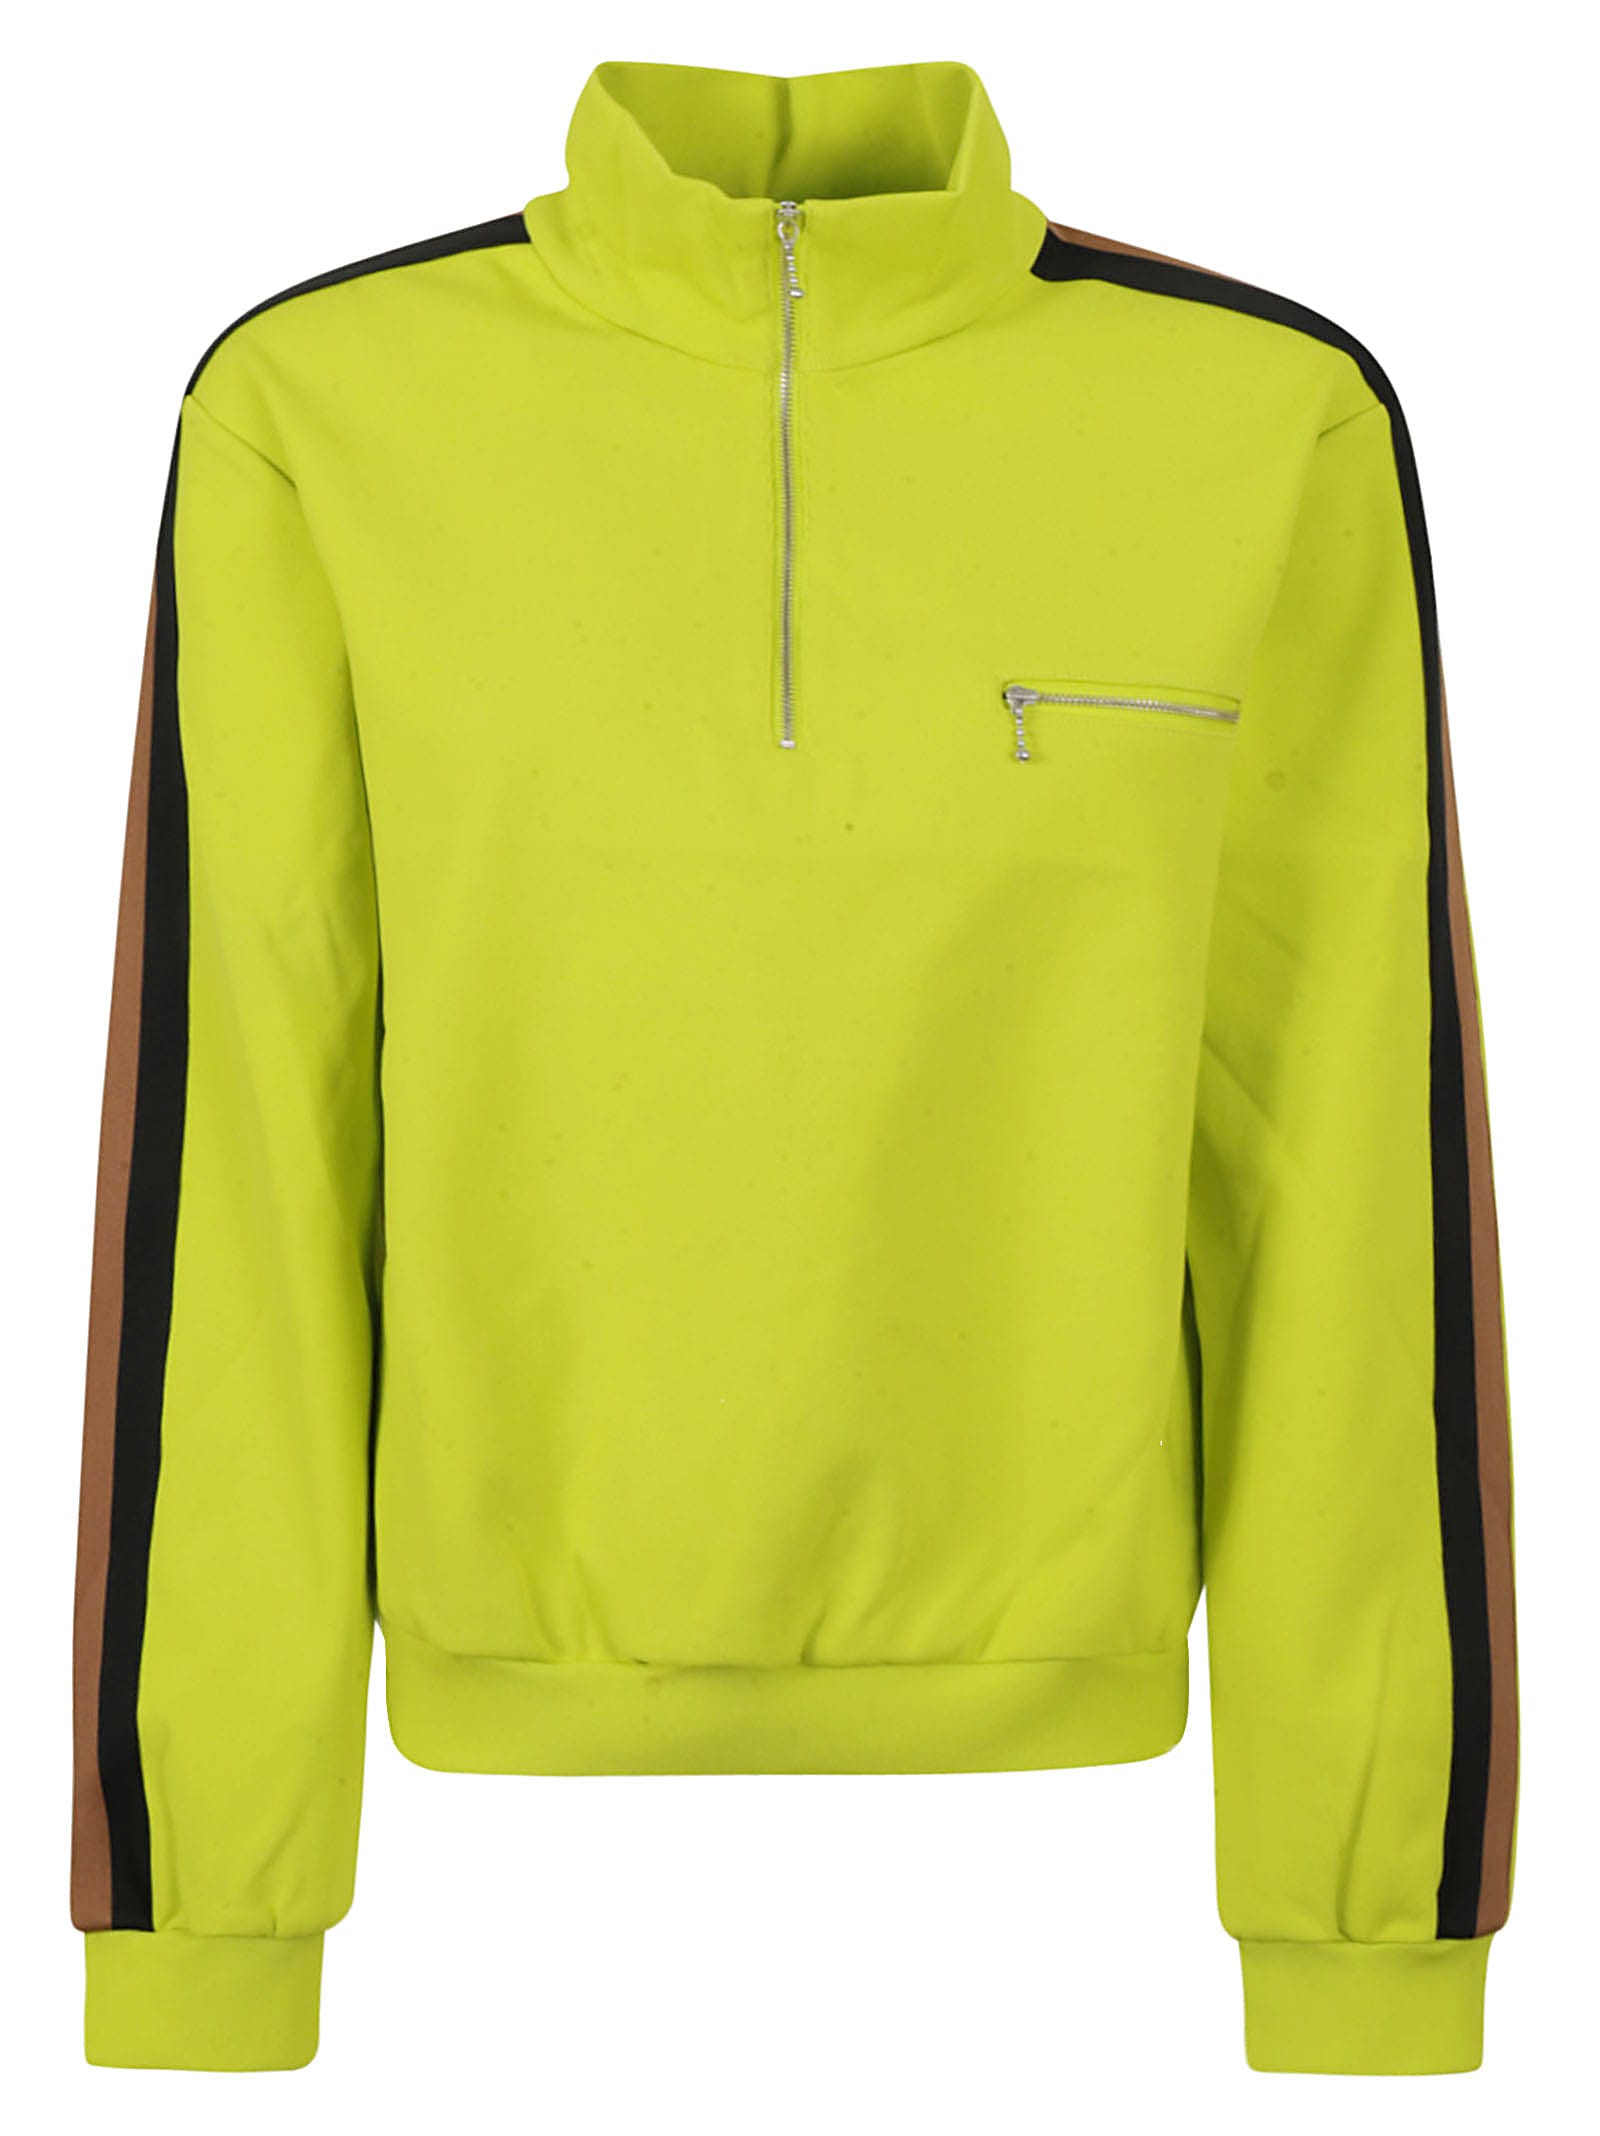 Tory Burch Knit Quarter Zip Sweater In Bright Lime